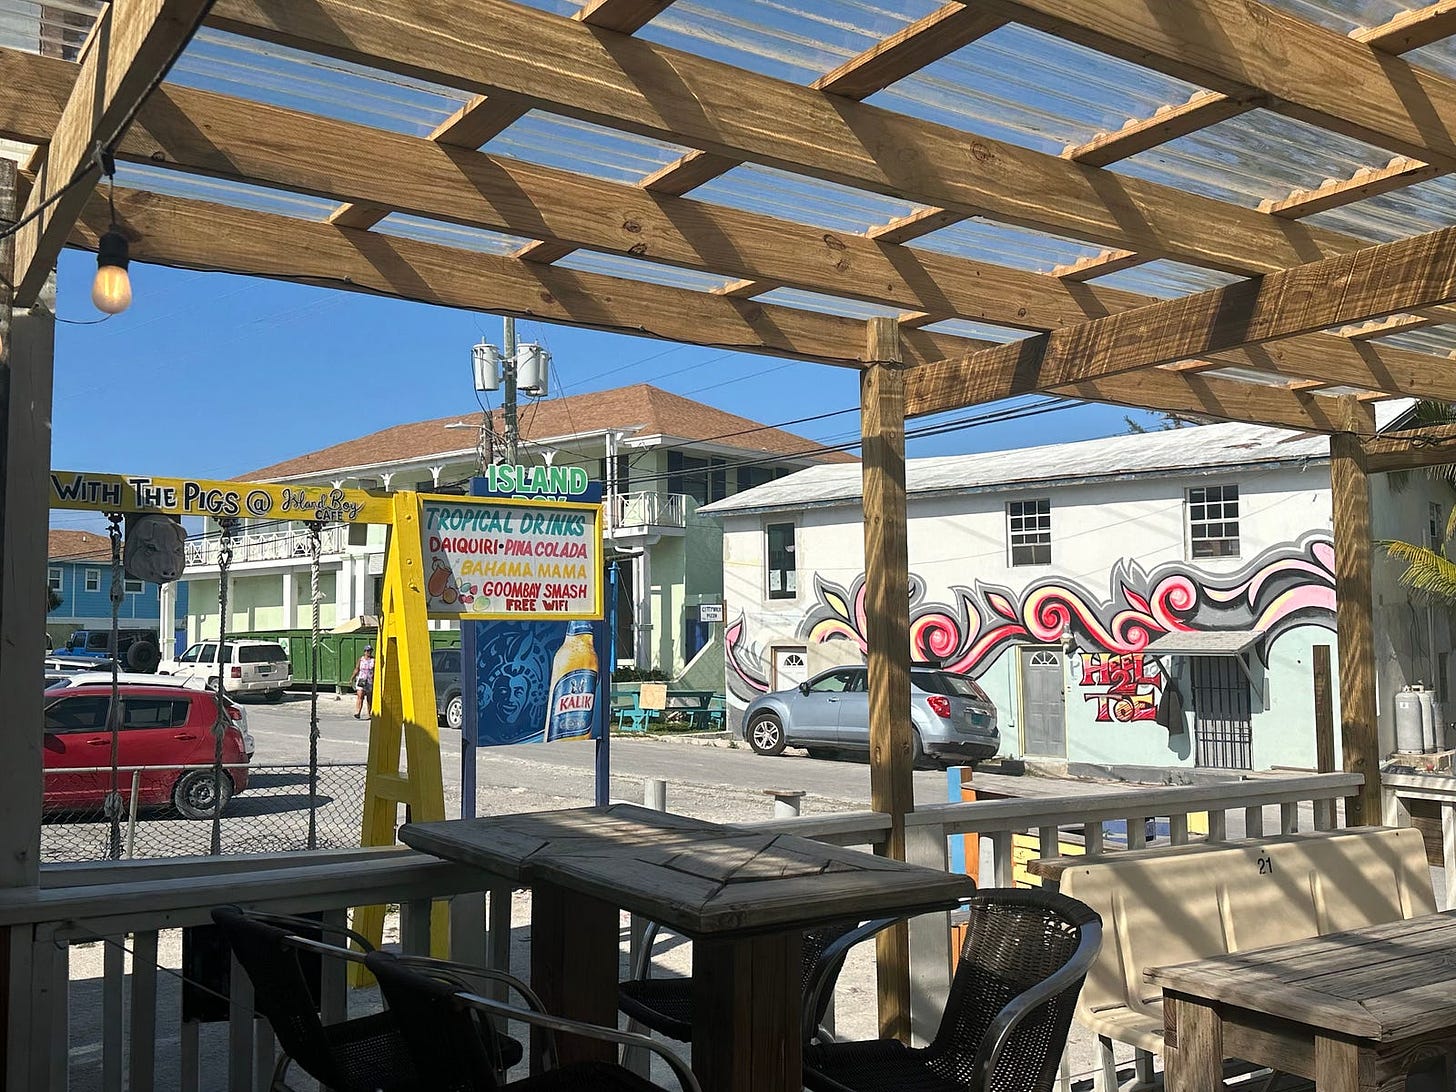 Wood pergola over picnic tables and chairs. A yellow sign — “Island Bar” and has list of a few cocktails. A colonial-style building is at the back of the parking lot with another plain white two-story building. There is pink and grey street art on the white building, that says “Heel 2 Toe”